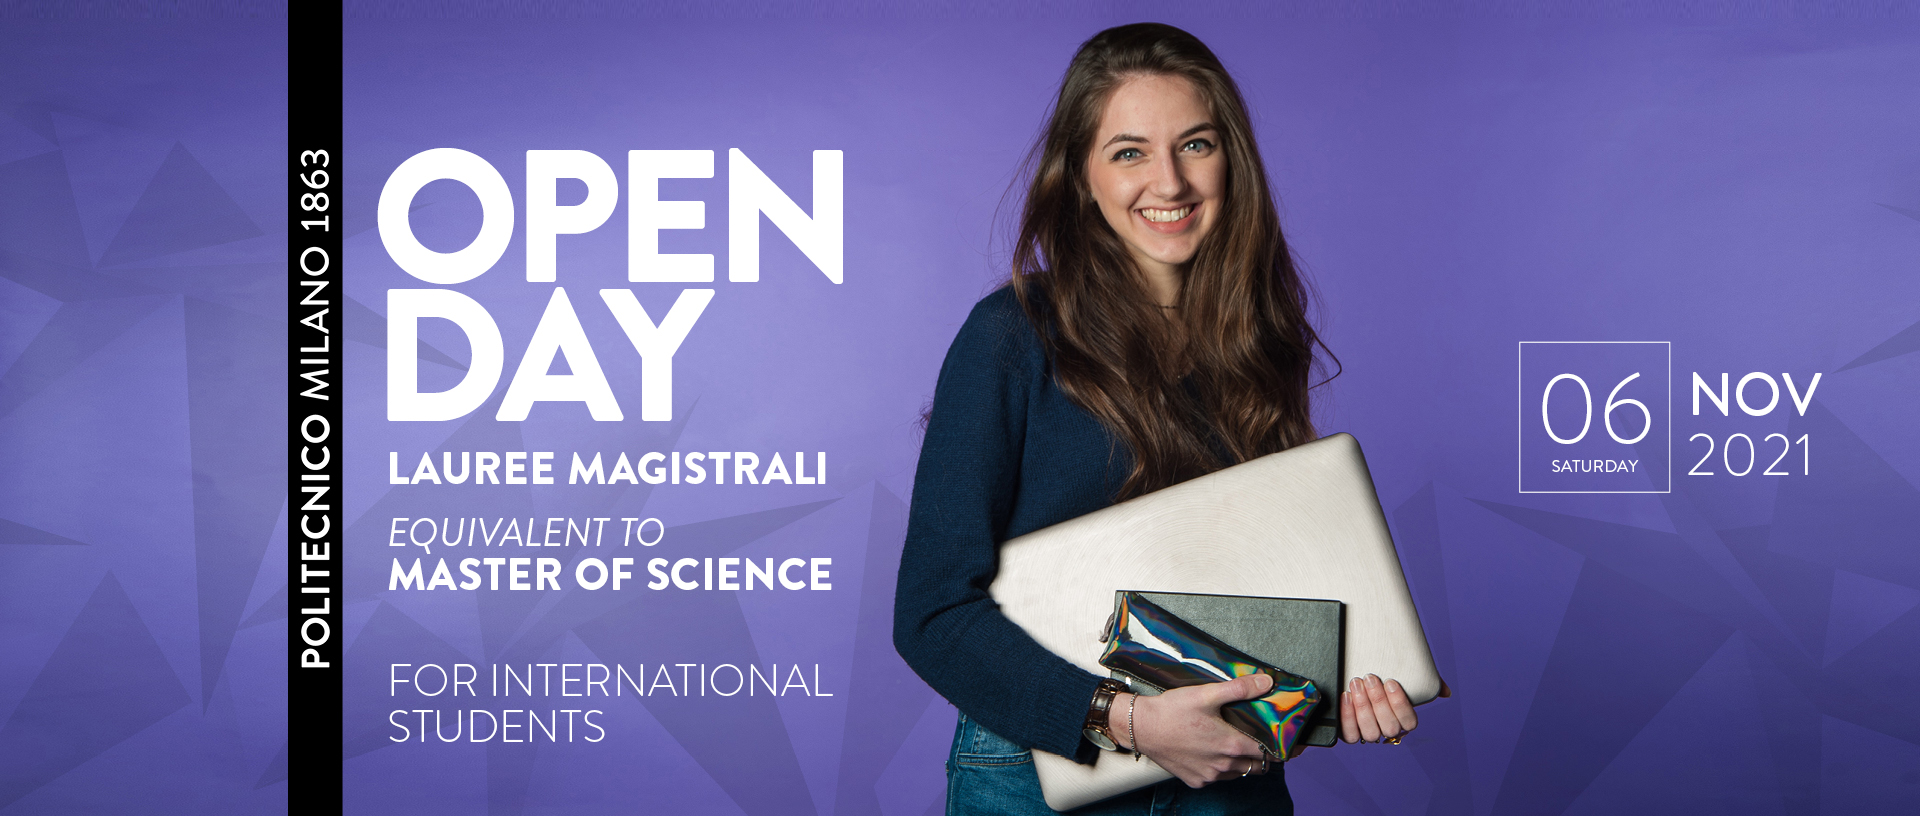 Open Day Lauree Magistrali (equivalent to Master of Science) for International Students - Saturday 6 Novembre 2021